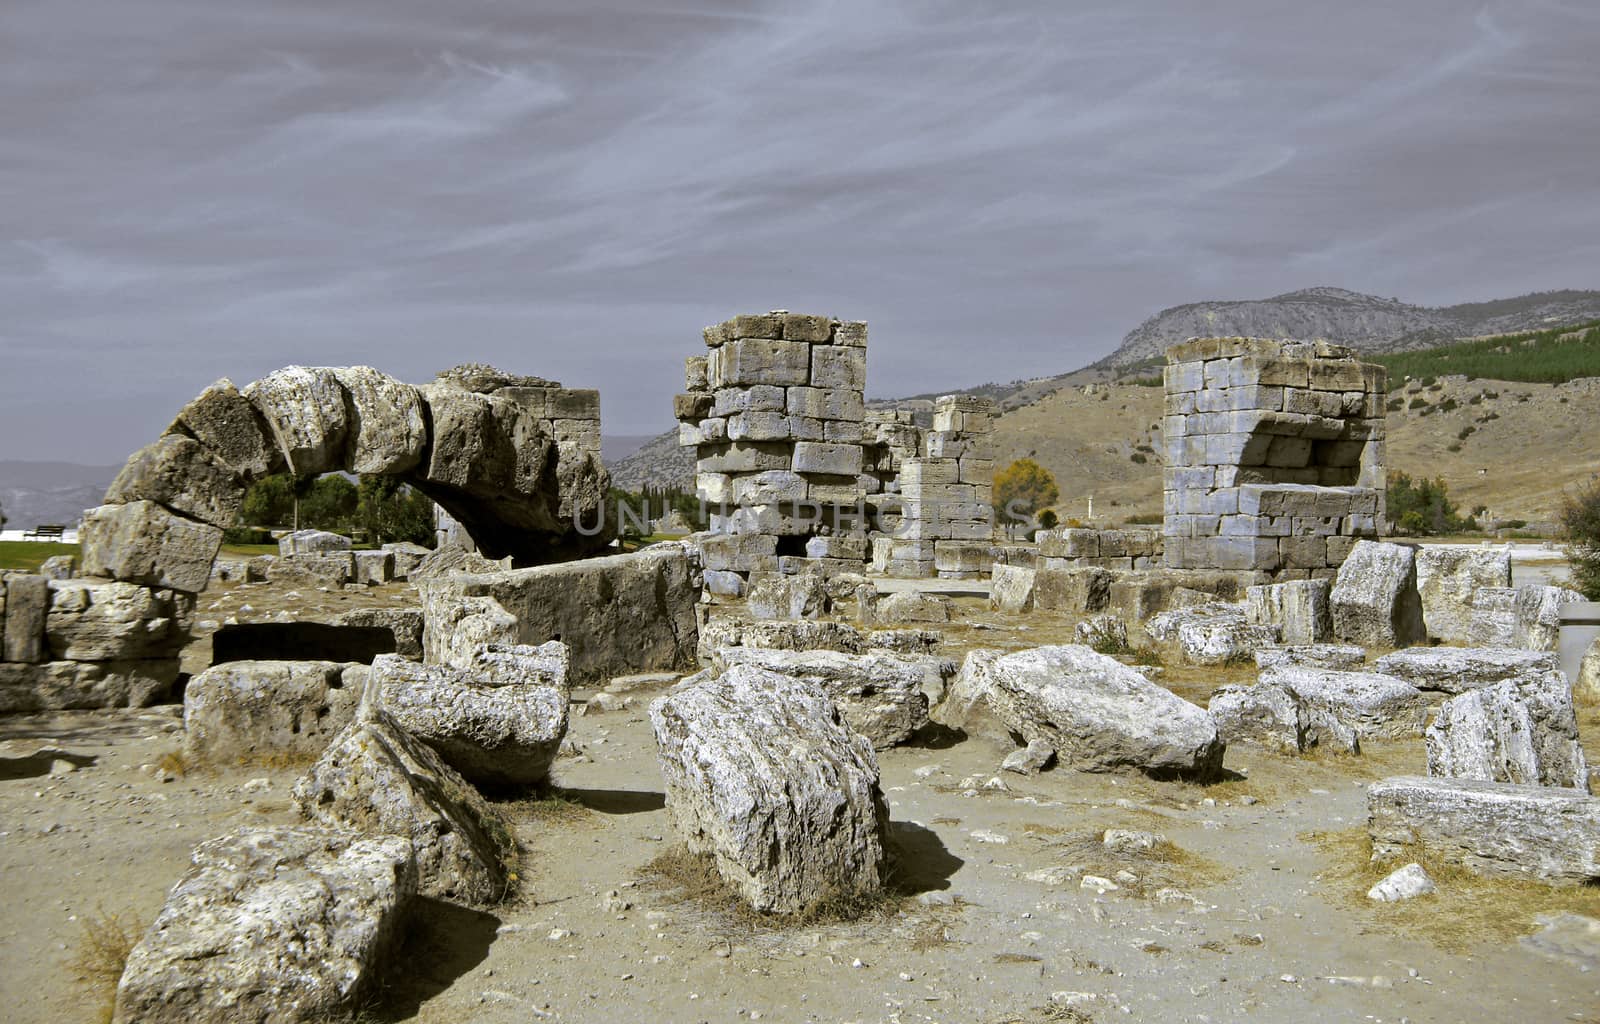 Ruins in the ancient town Hierapolis Turkey by scullery